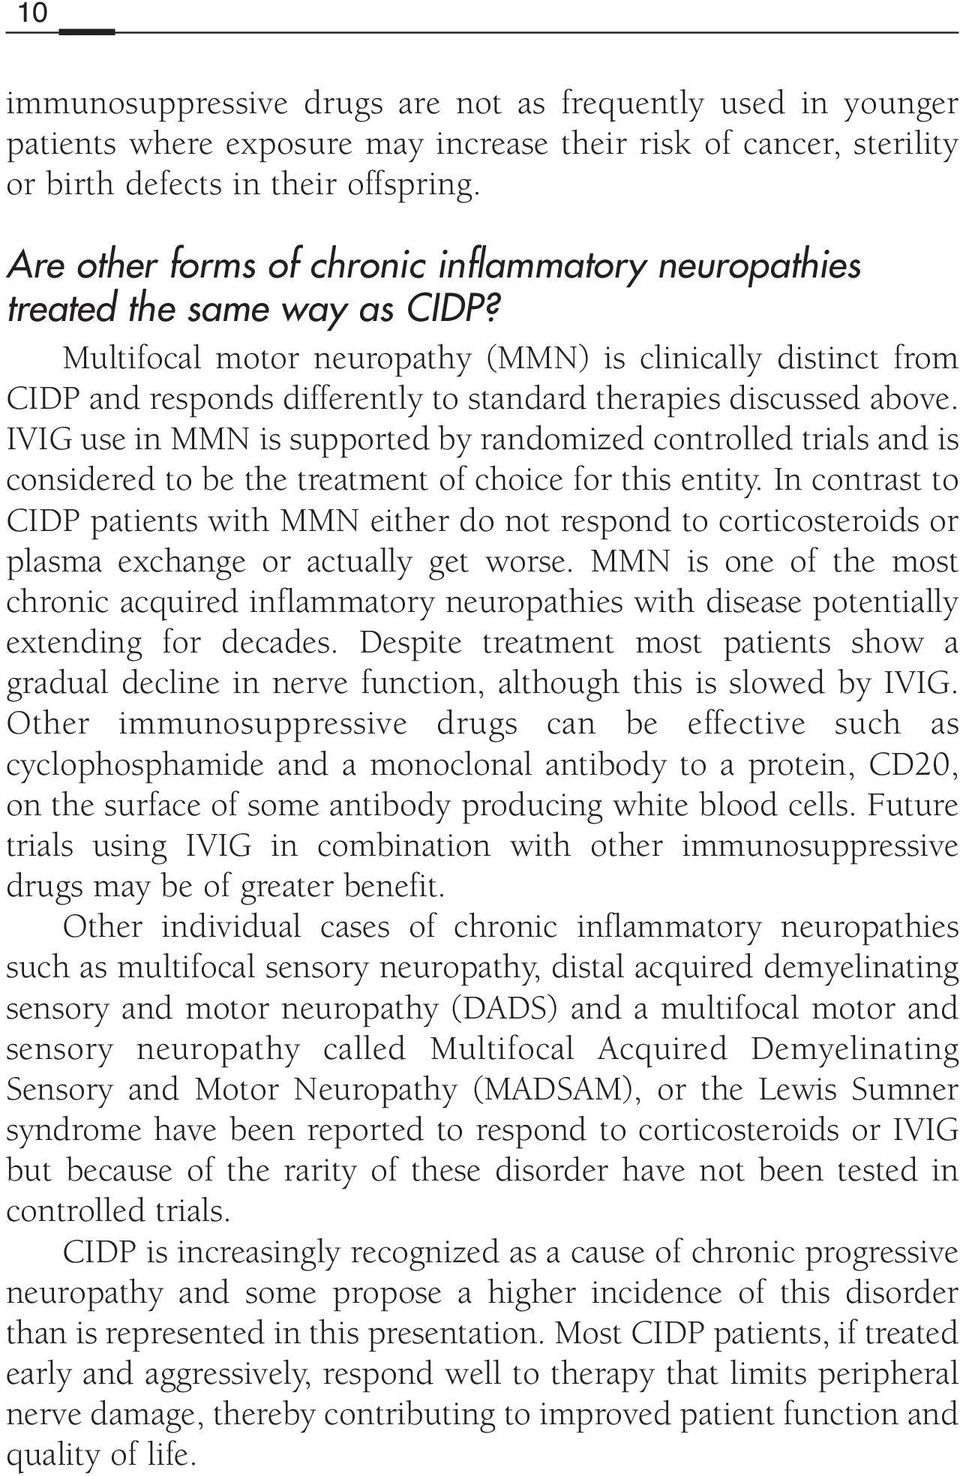 Multifocal motor neuropathy (MMN) is clinically distinct from CIDP and responds differently to standard therapies discussed above.